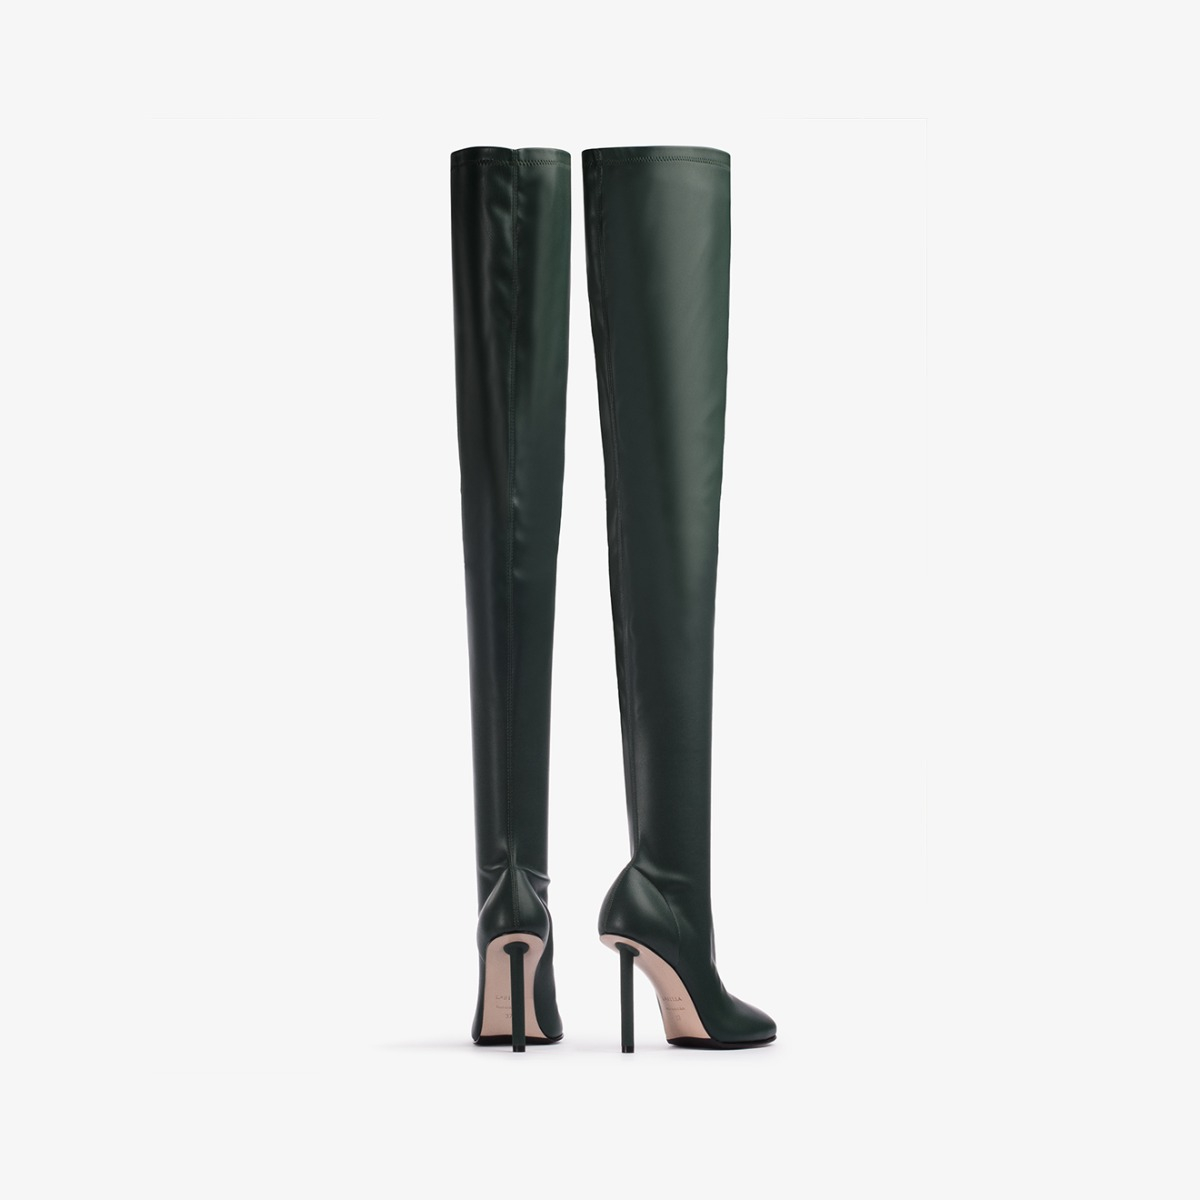 KARLIE THIGH-HIGH BOOT 120 mm - Le Silla official outlet